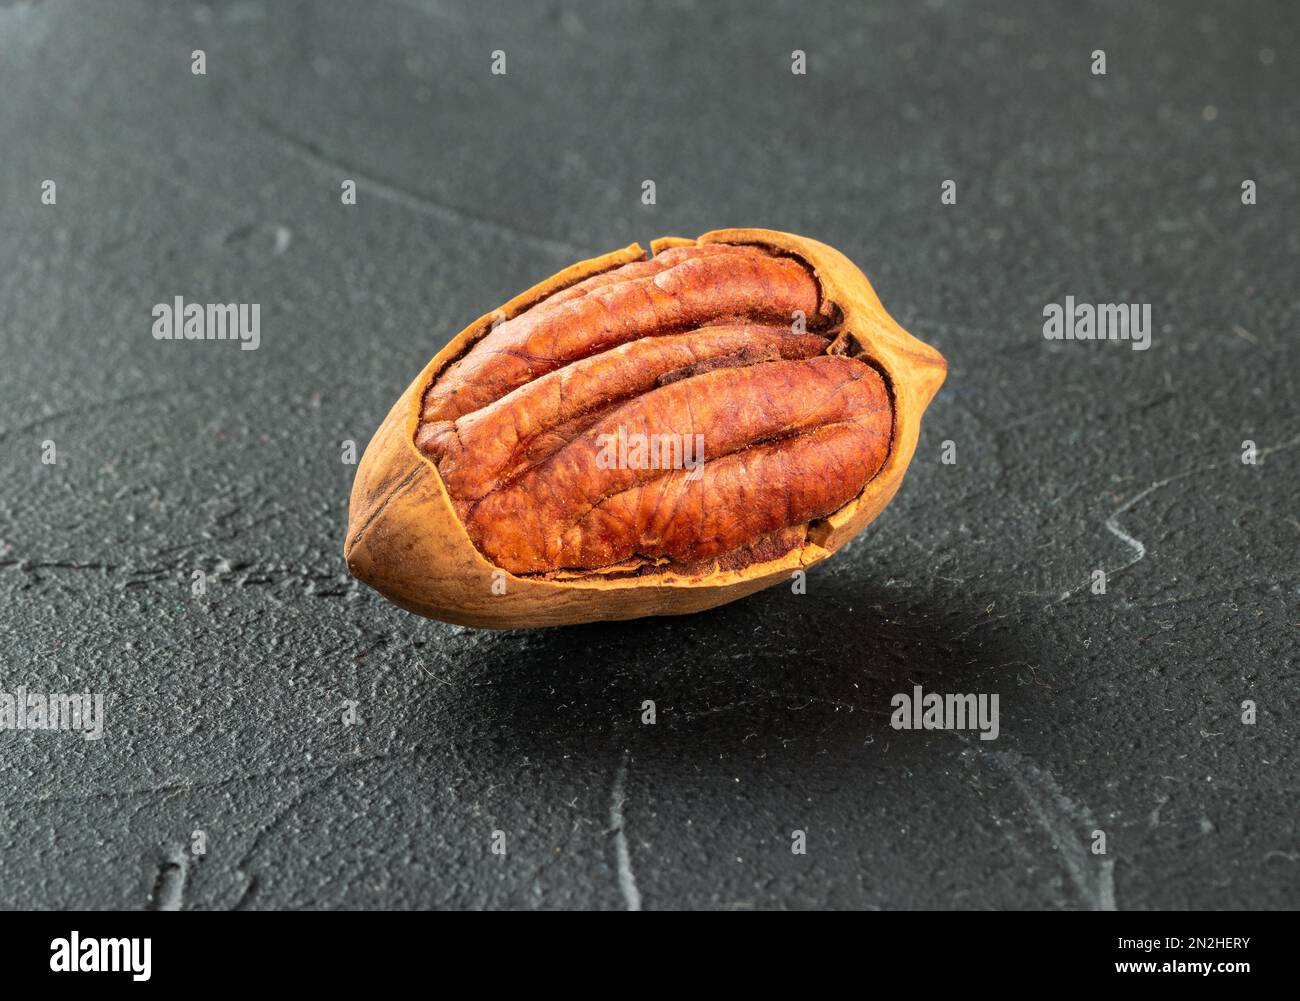 Cracked in-shell pecan close-up on dark concrete background Stock Photo